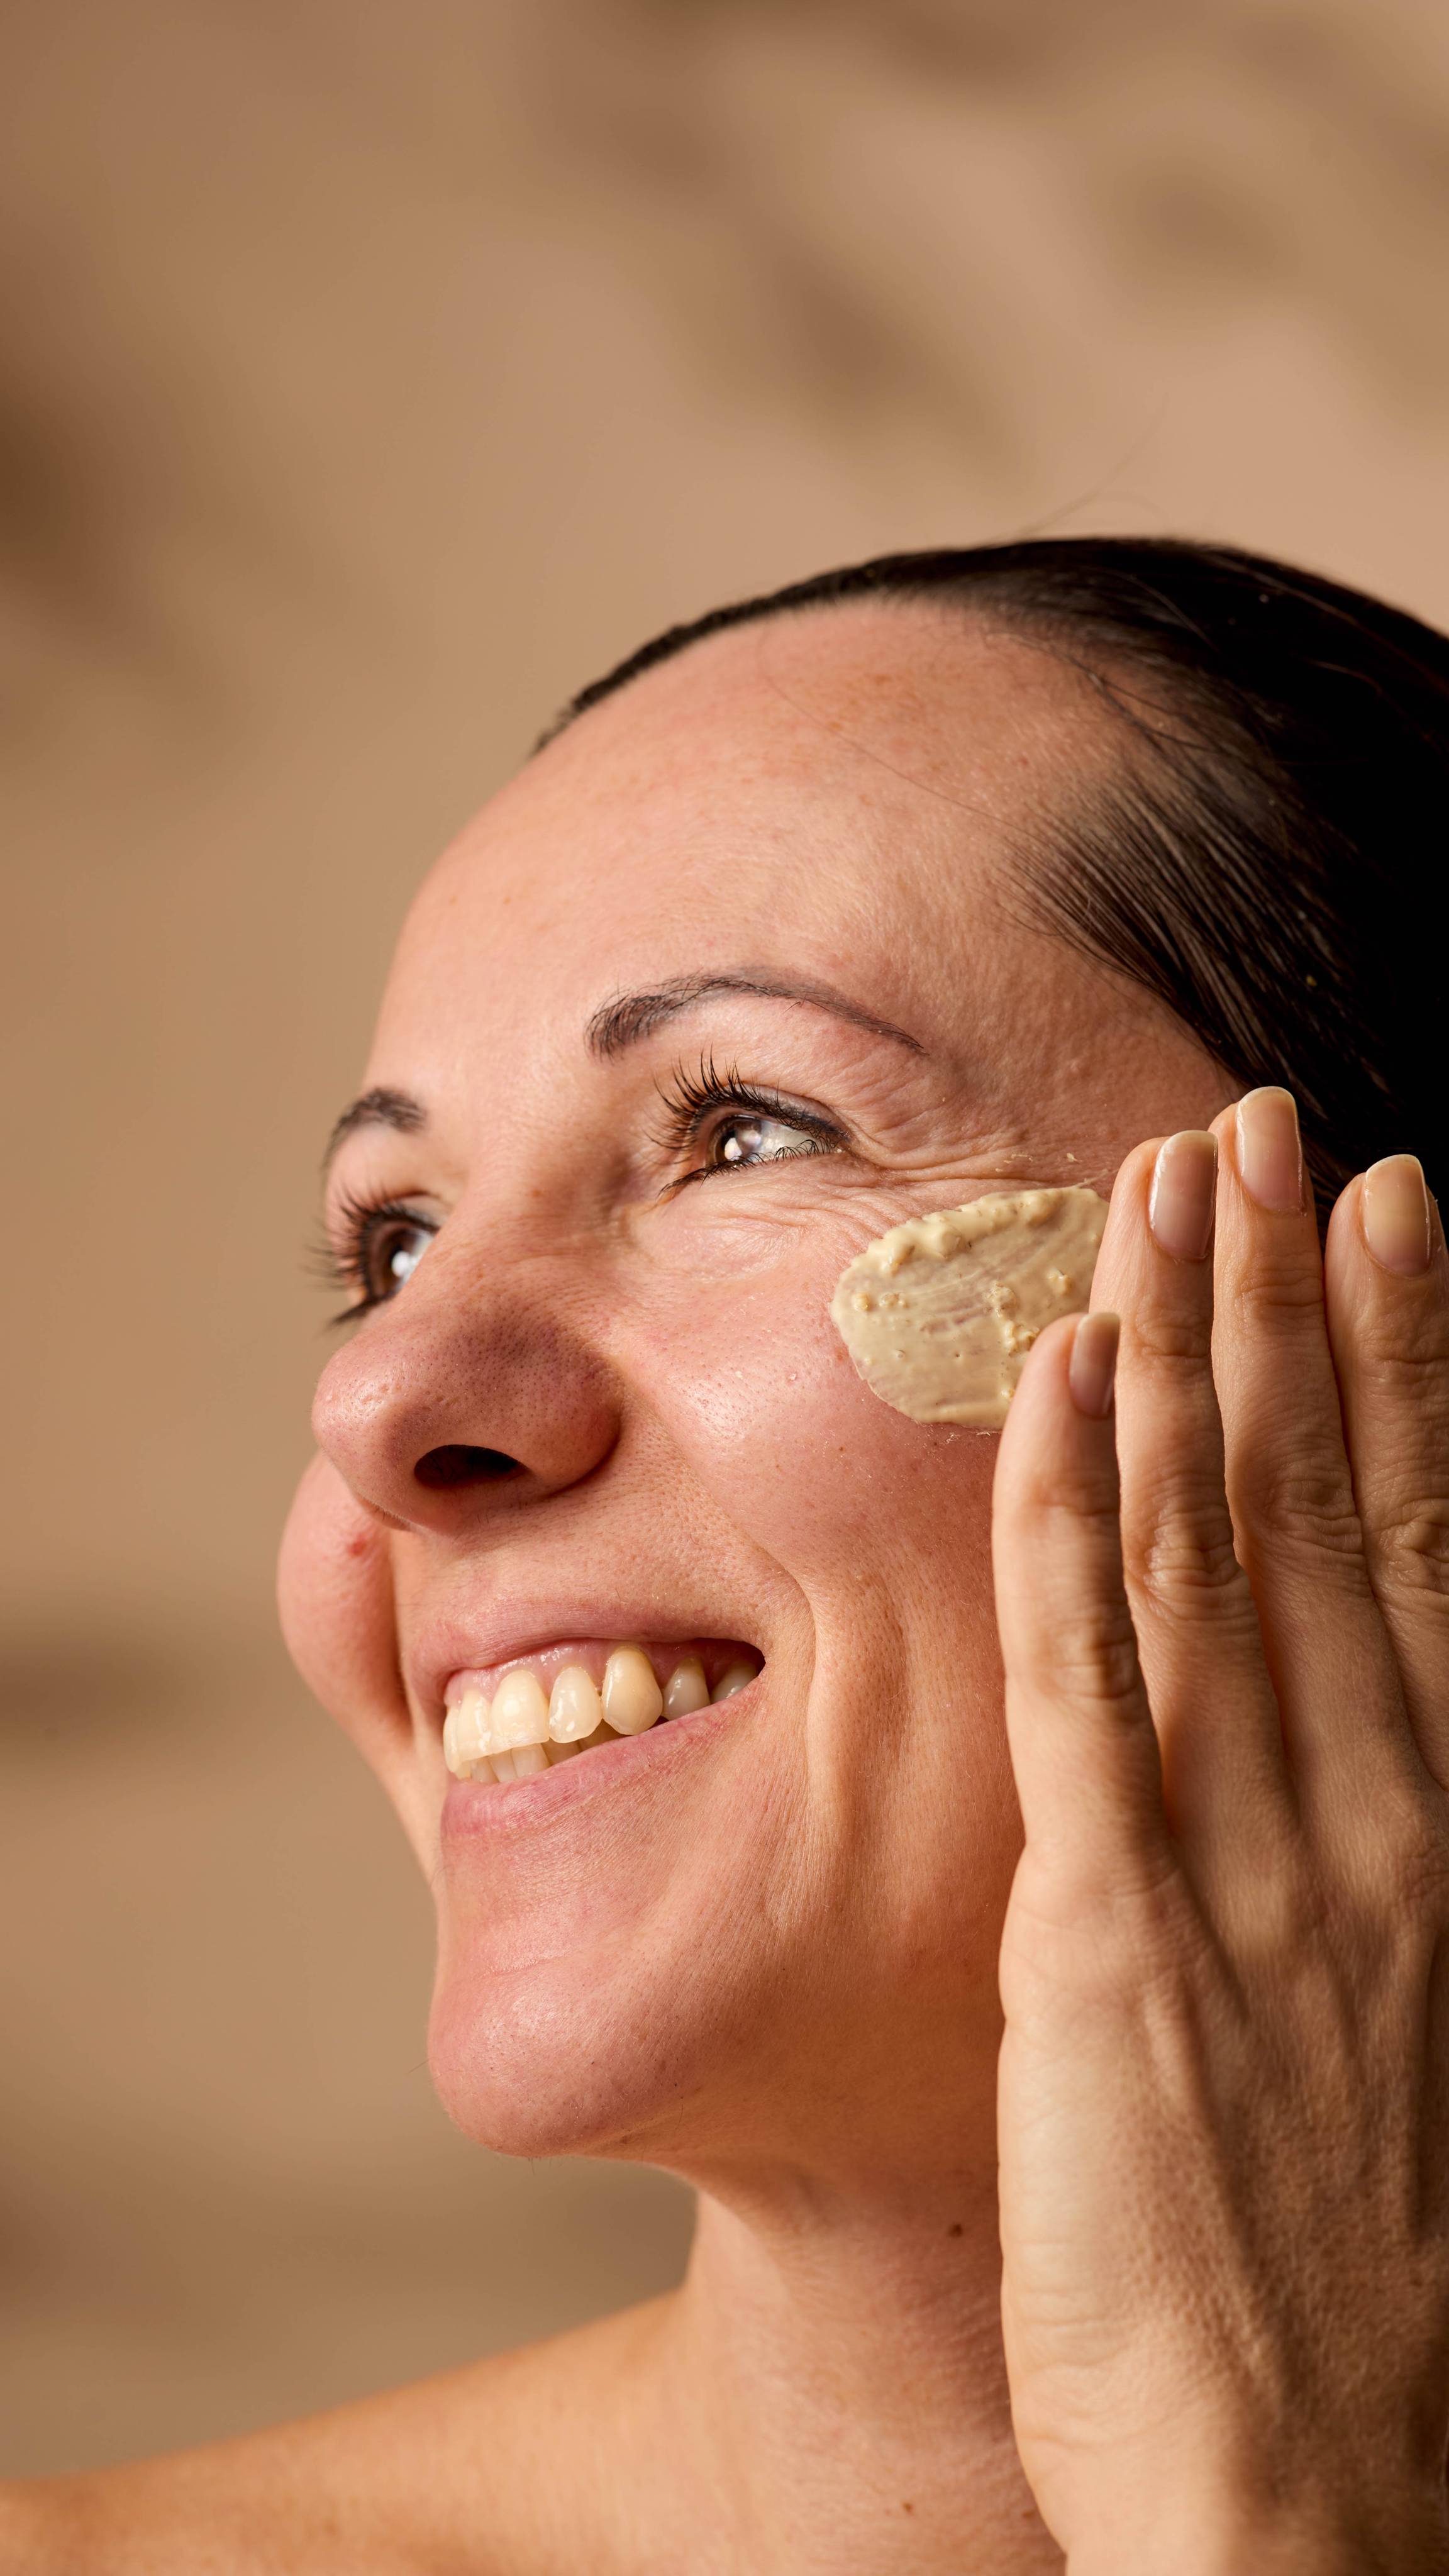 The image shows the model smiling into the distance as they apply the Skin Soothing Porridge face mask to their cheek. 